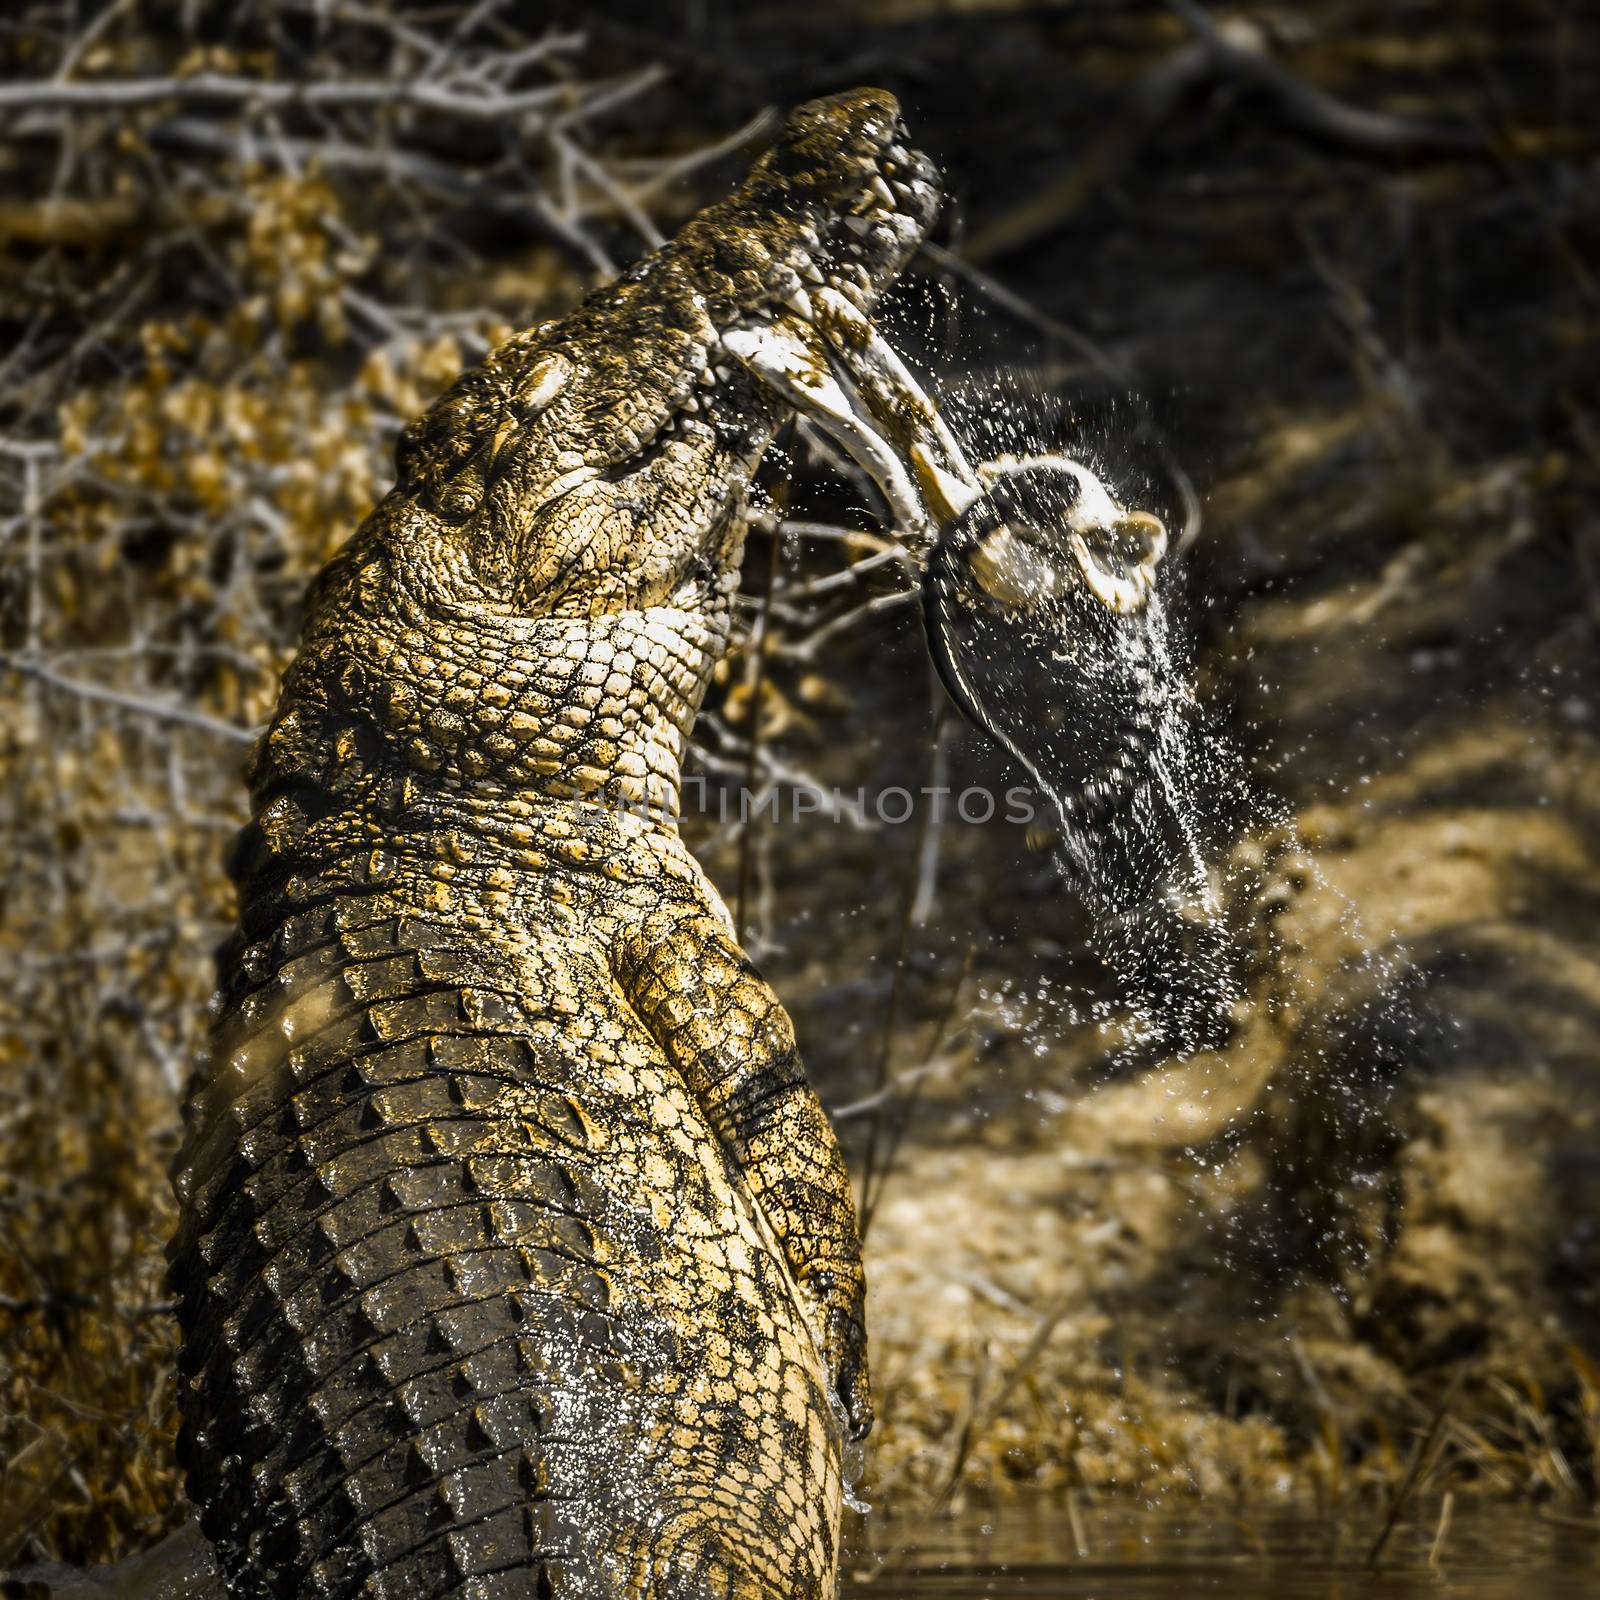 Nile crocodile in Kruger National park, South Africa by PACOCOMO